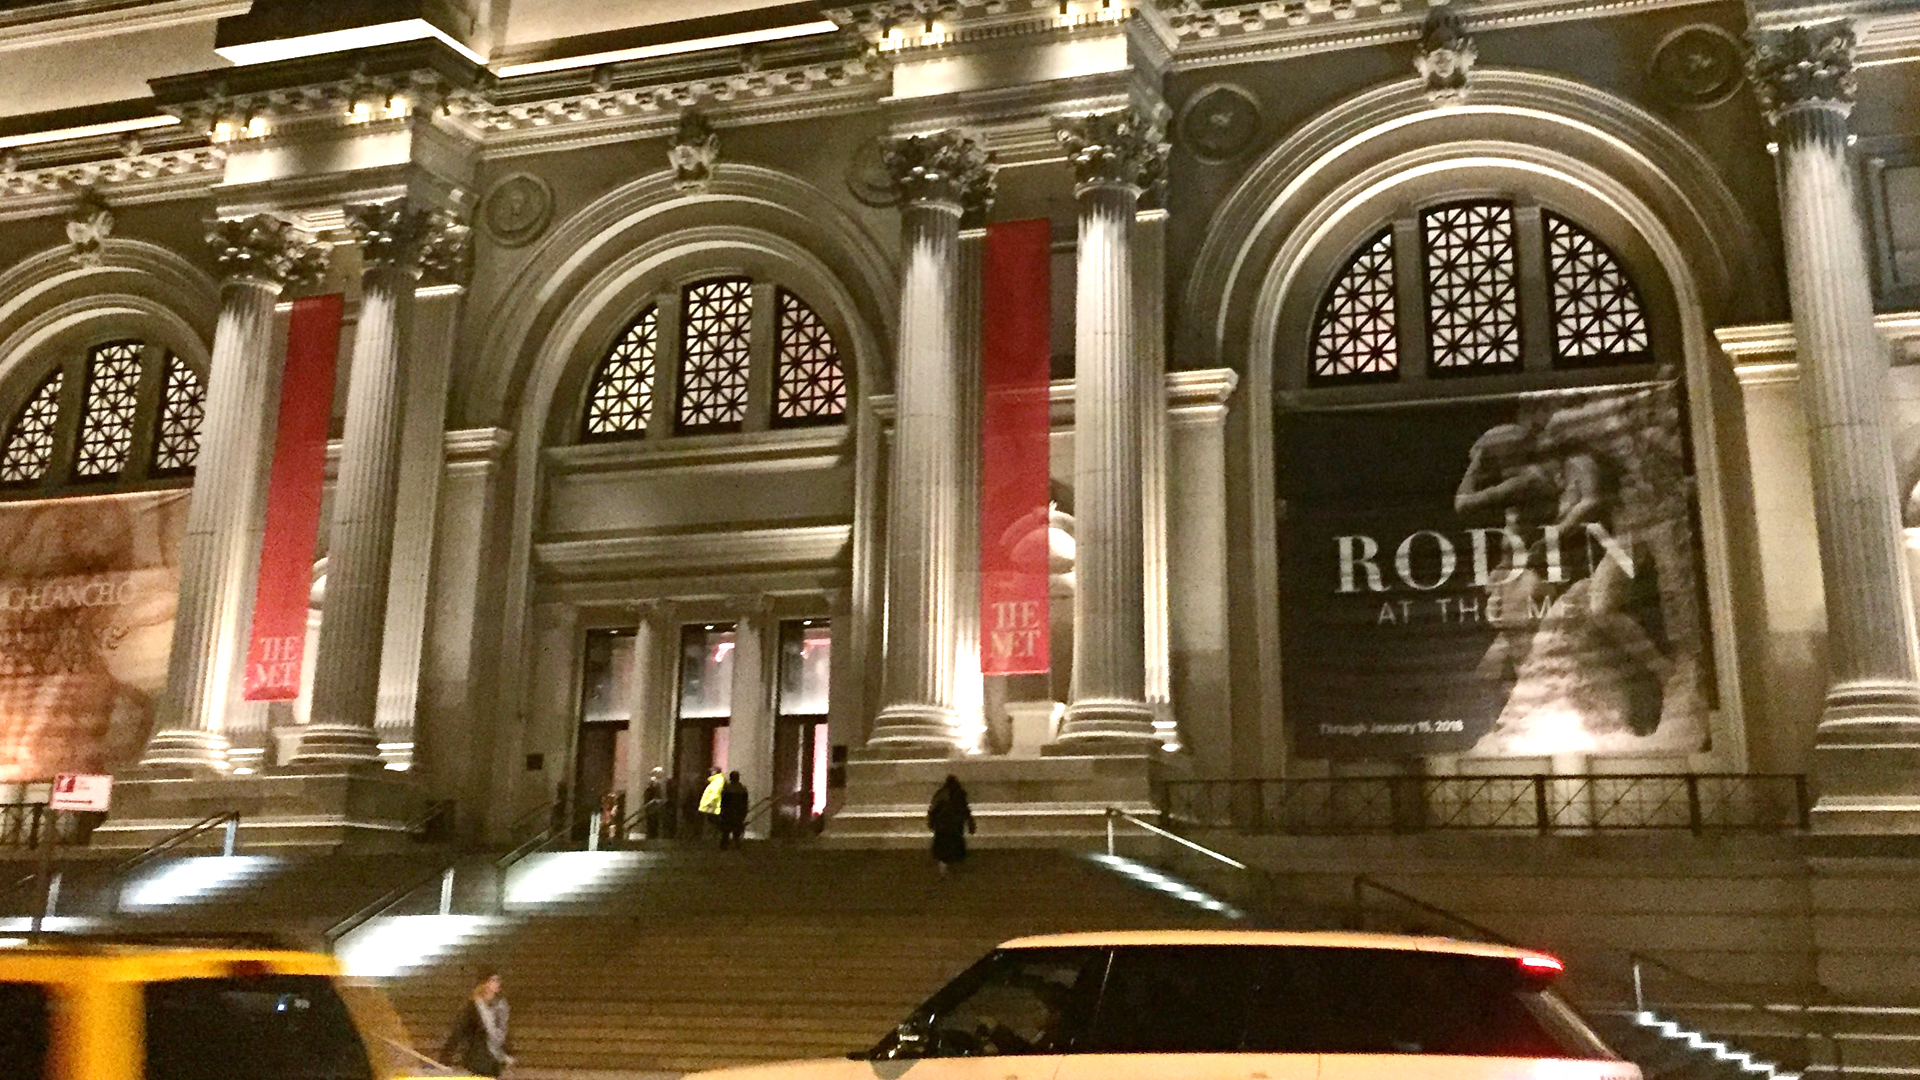 Upper East side Fifth Avenue of THE MET museum night time